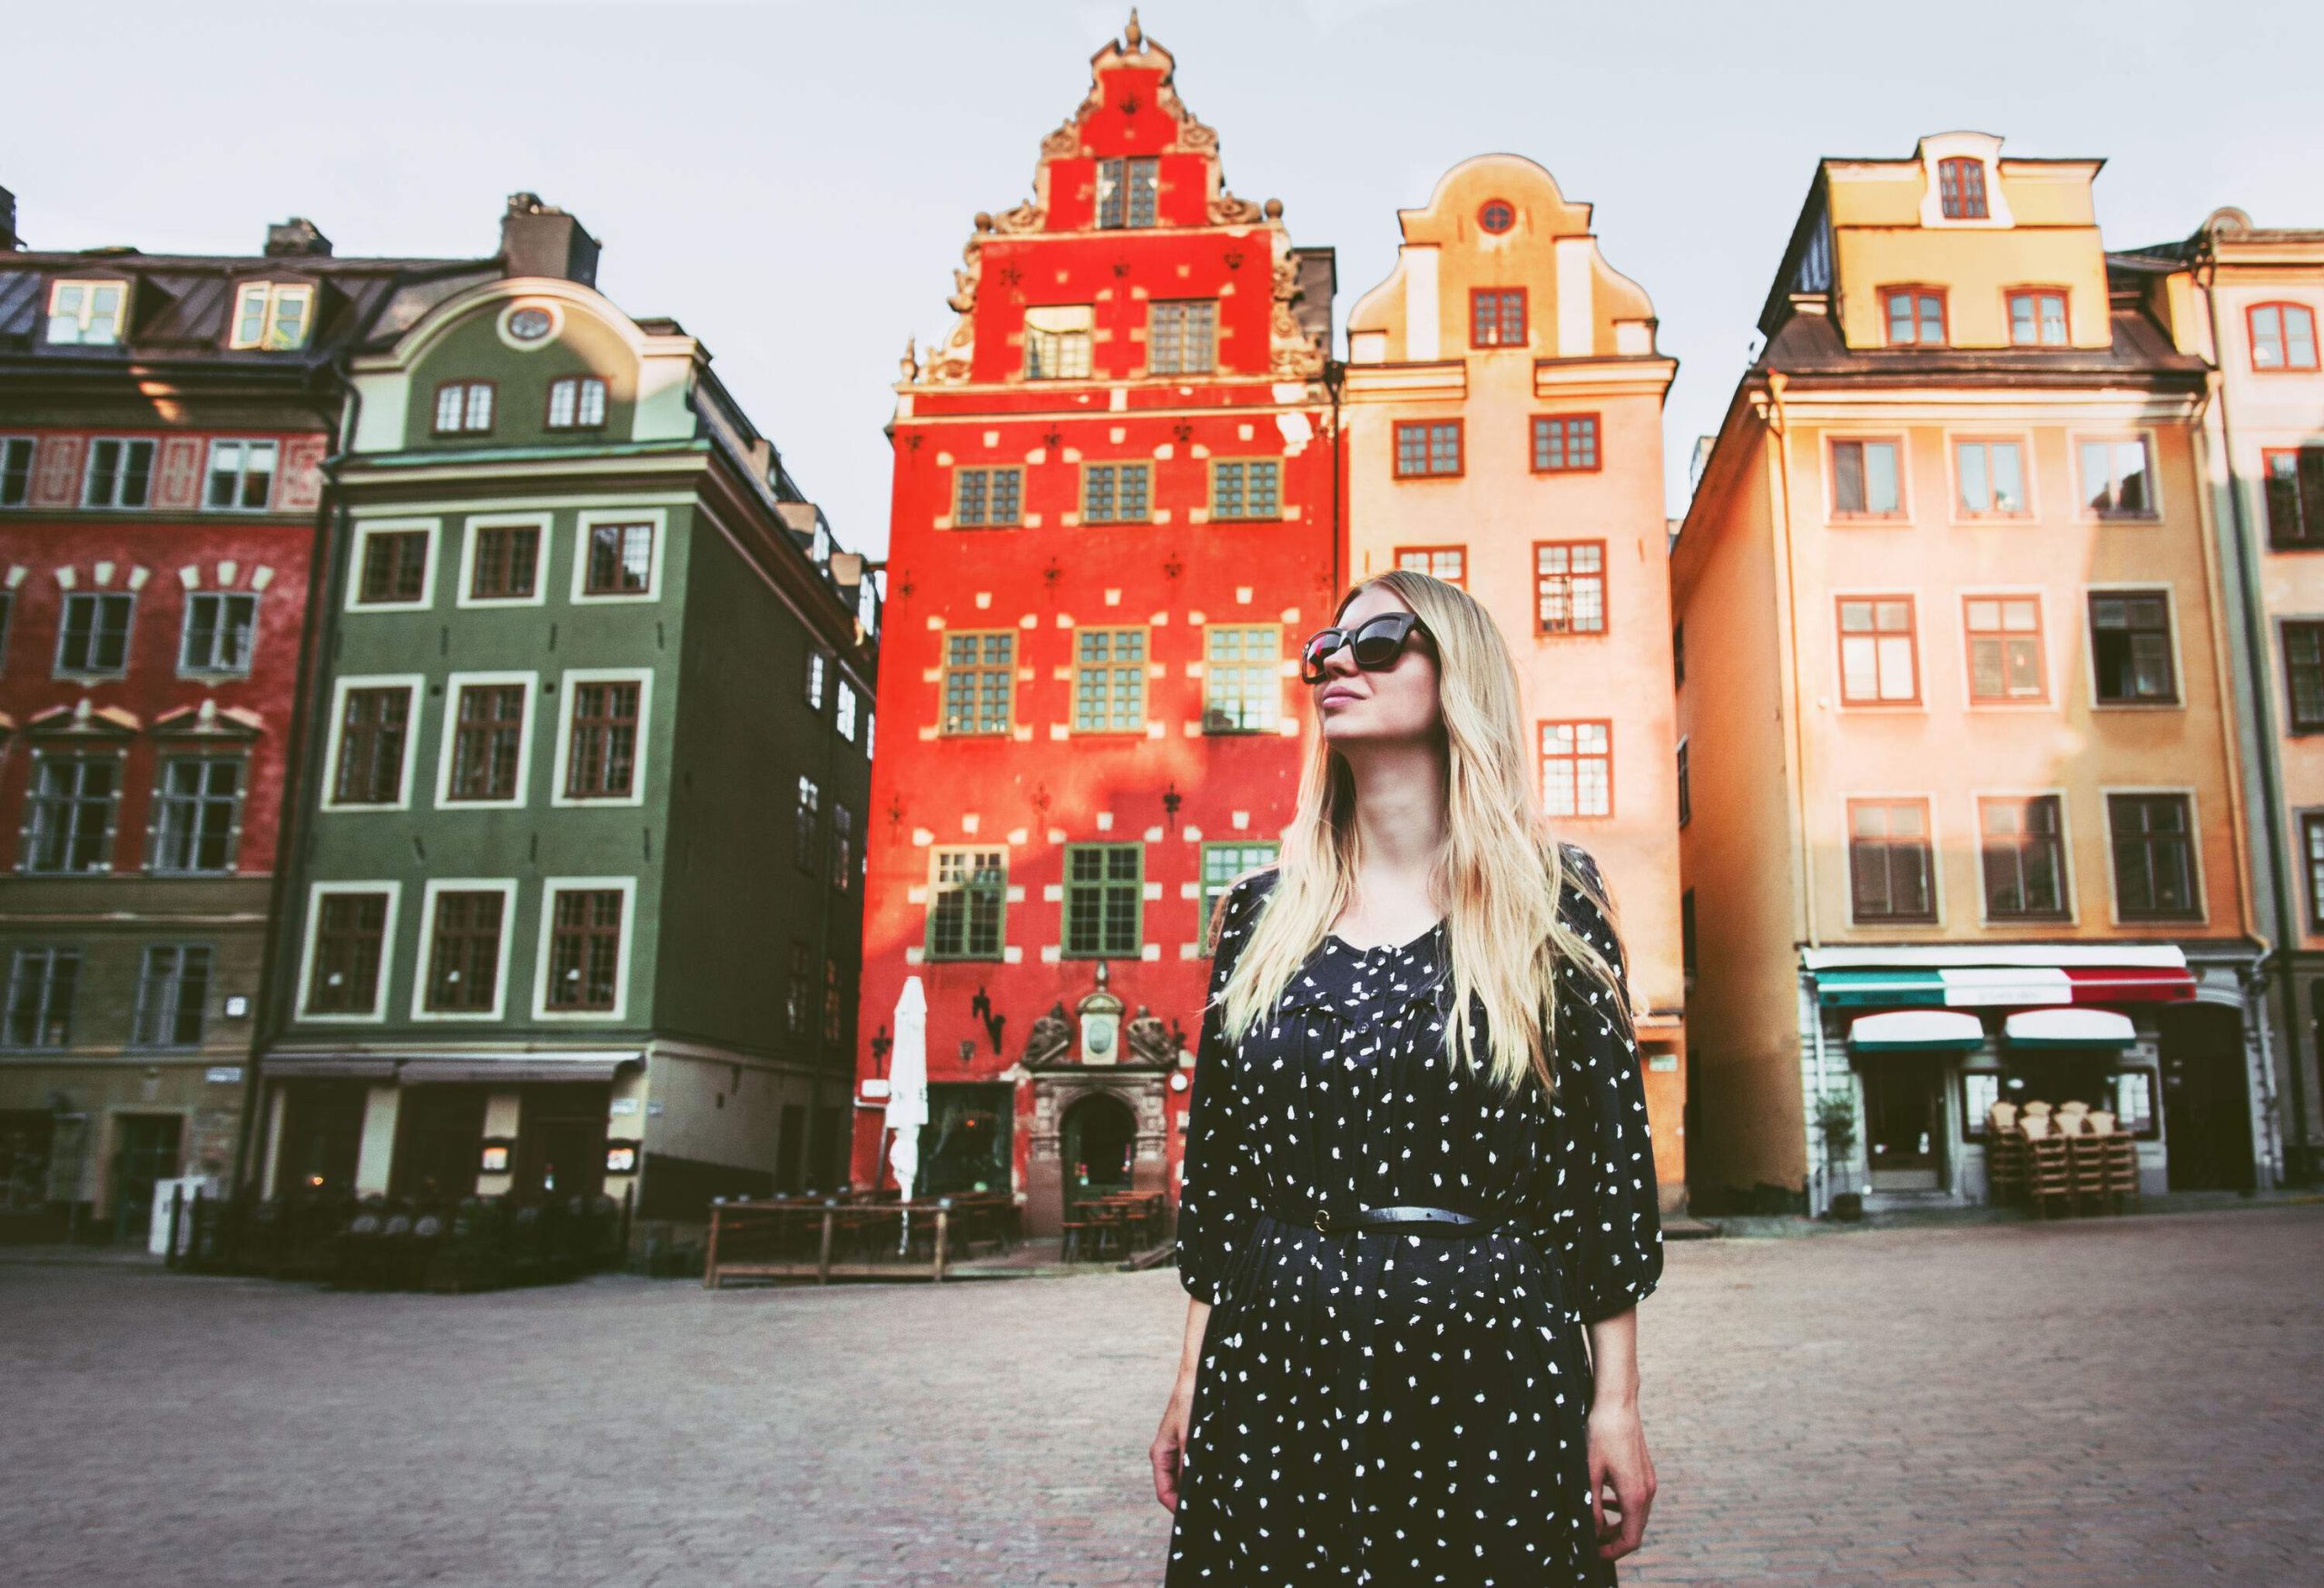 A blonde woman in a black dress and sunglasses stands in the middle of a public square surrounded by colourful buildings.